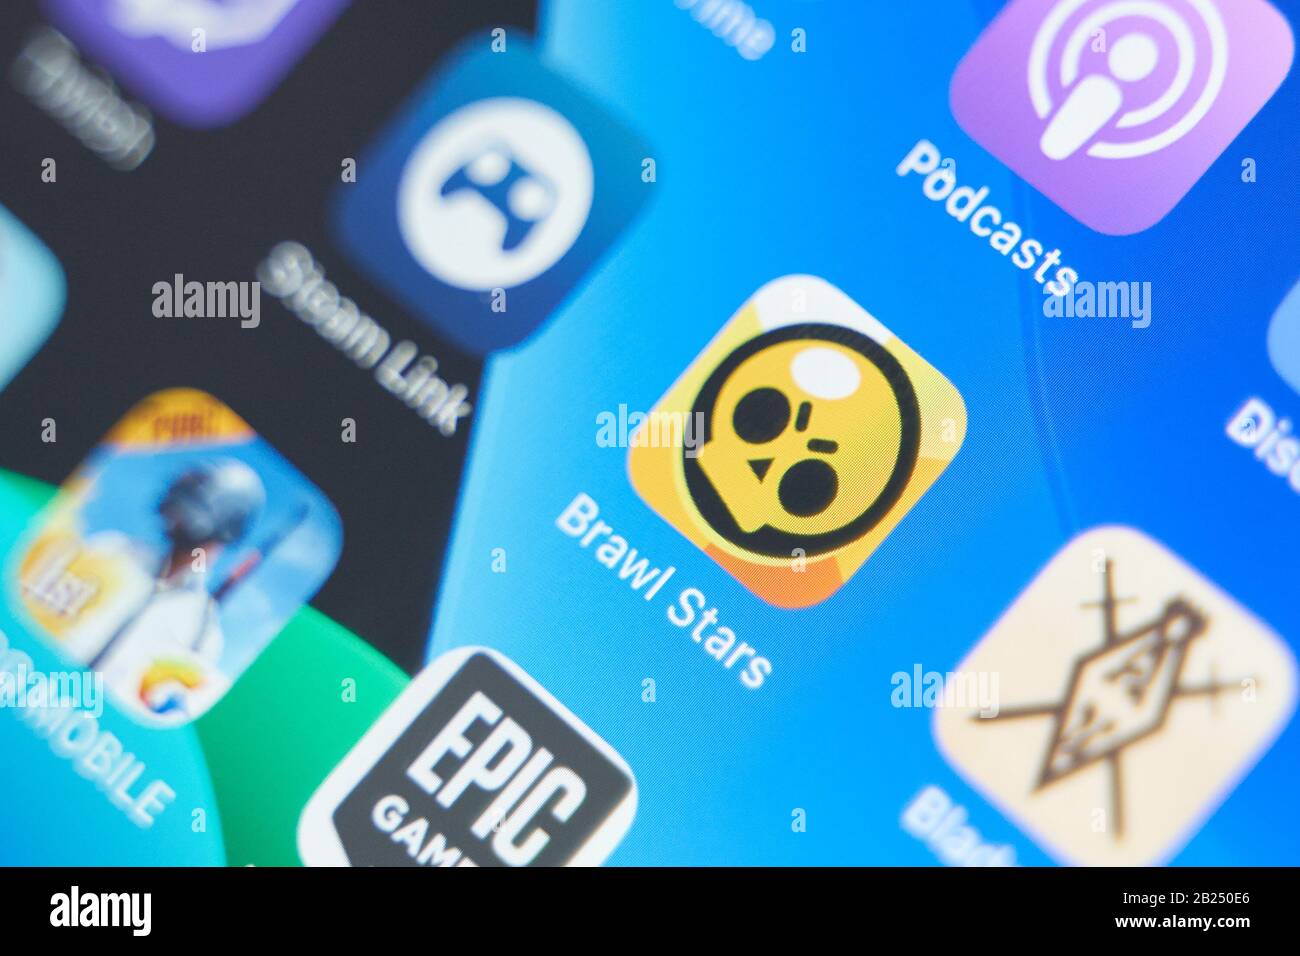 Brawl Stars High Resolution Stock Photography And Images Alamy - in which language is brawl stars written